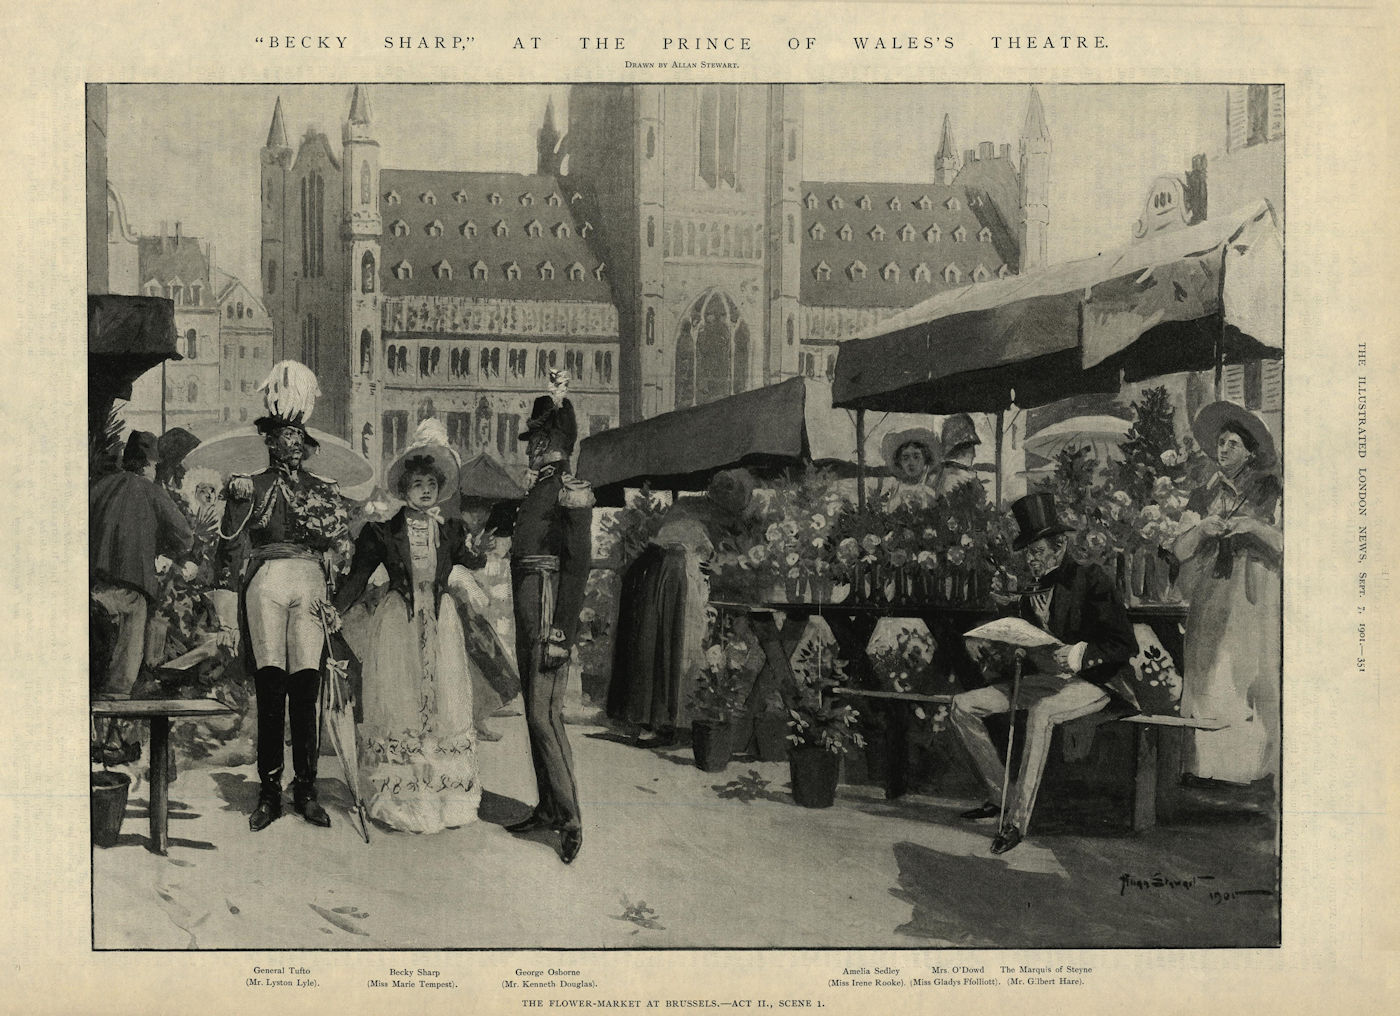 Associate Product The Flower-Market at Brussels. "Becky Sharp", Prince of Wales's Theatre 1901